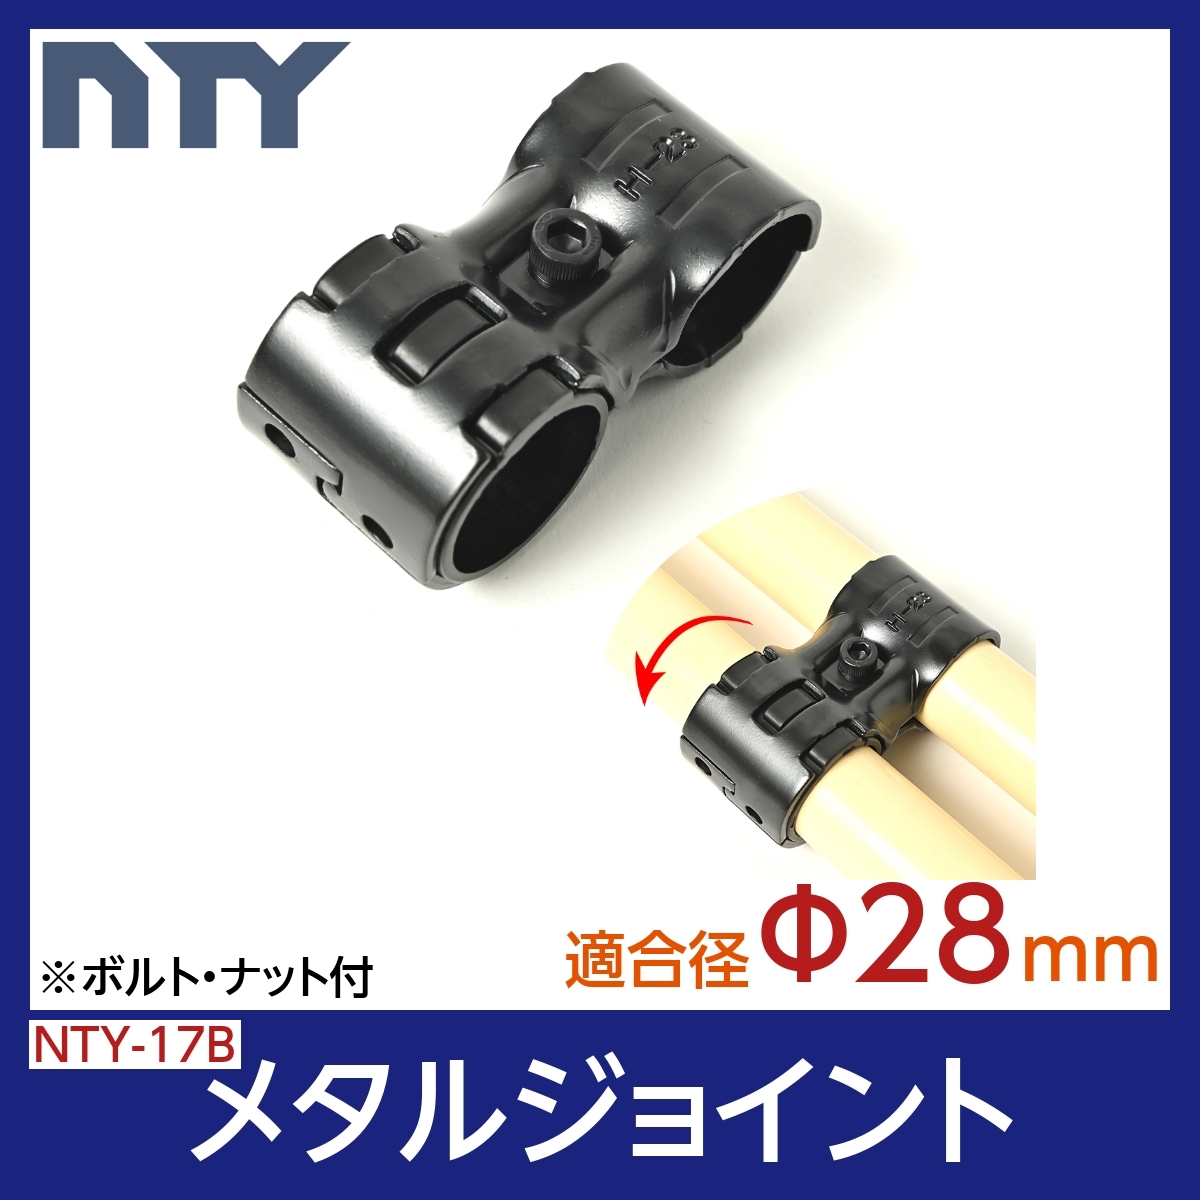 NTY metal joint NTY-17B black Φ28mm for assembly pipe hinge joint rotation DIY shelves rack 